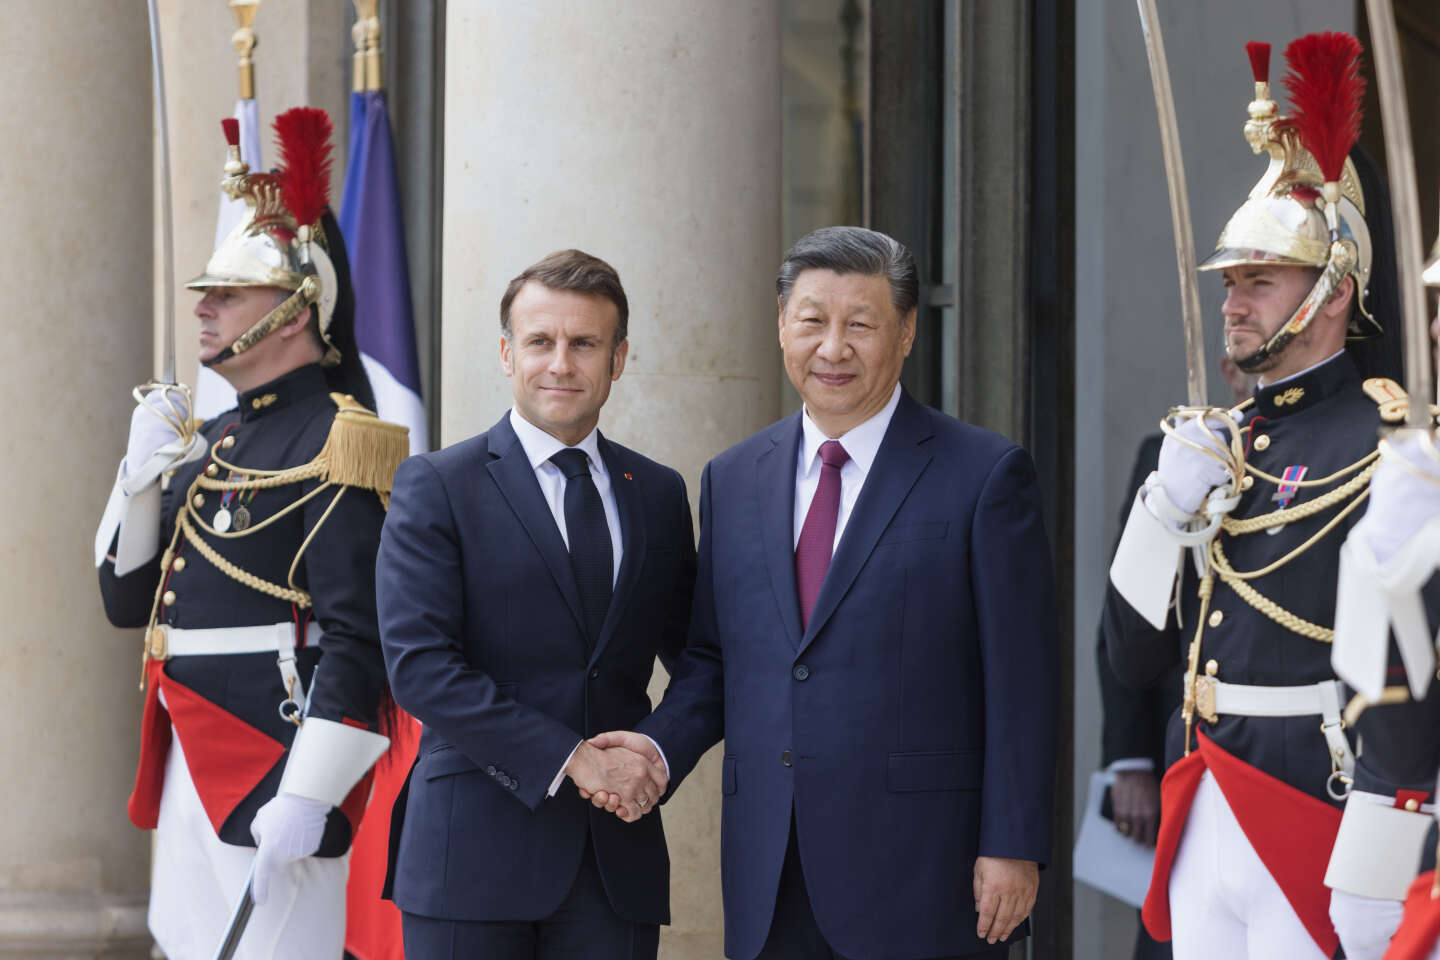 “Welcoming Xi Jinping to France is a policy of complicity in the Uyghur genocide”